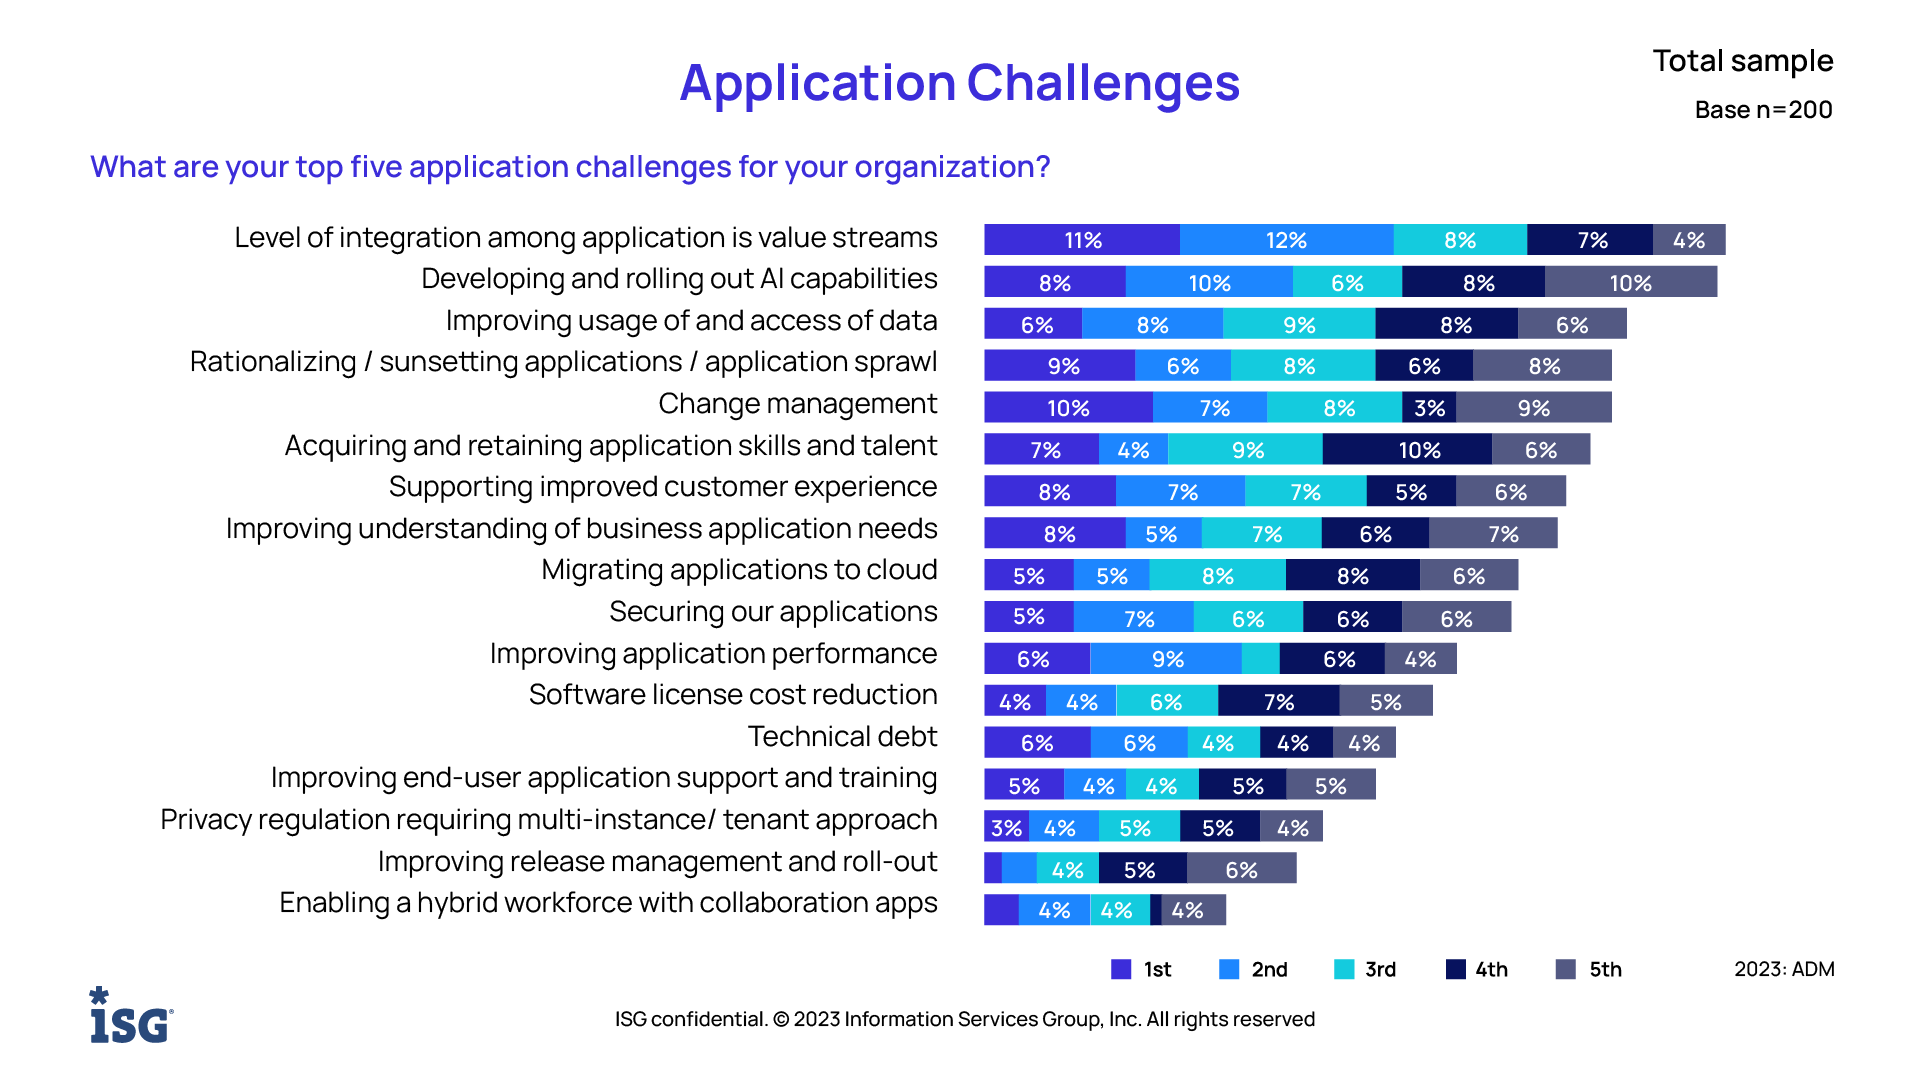 What are your top 5 application challenges for your organization?